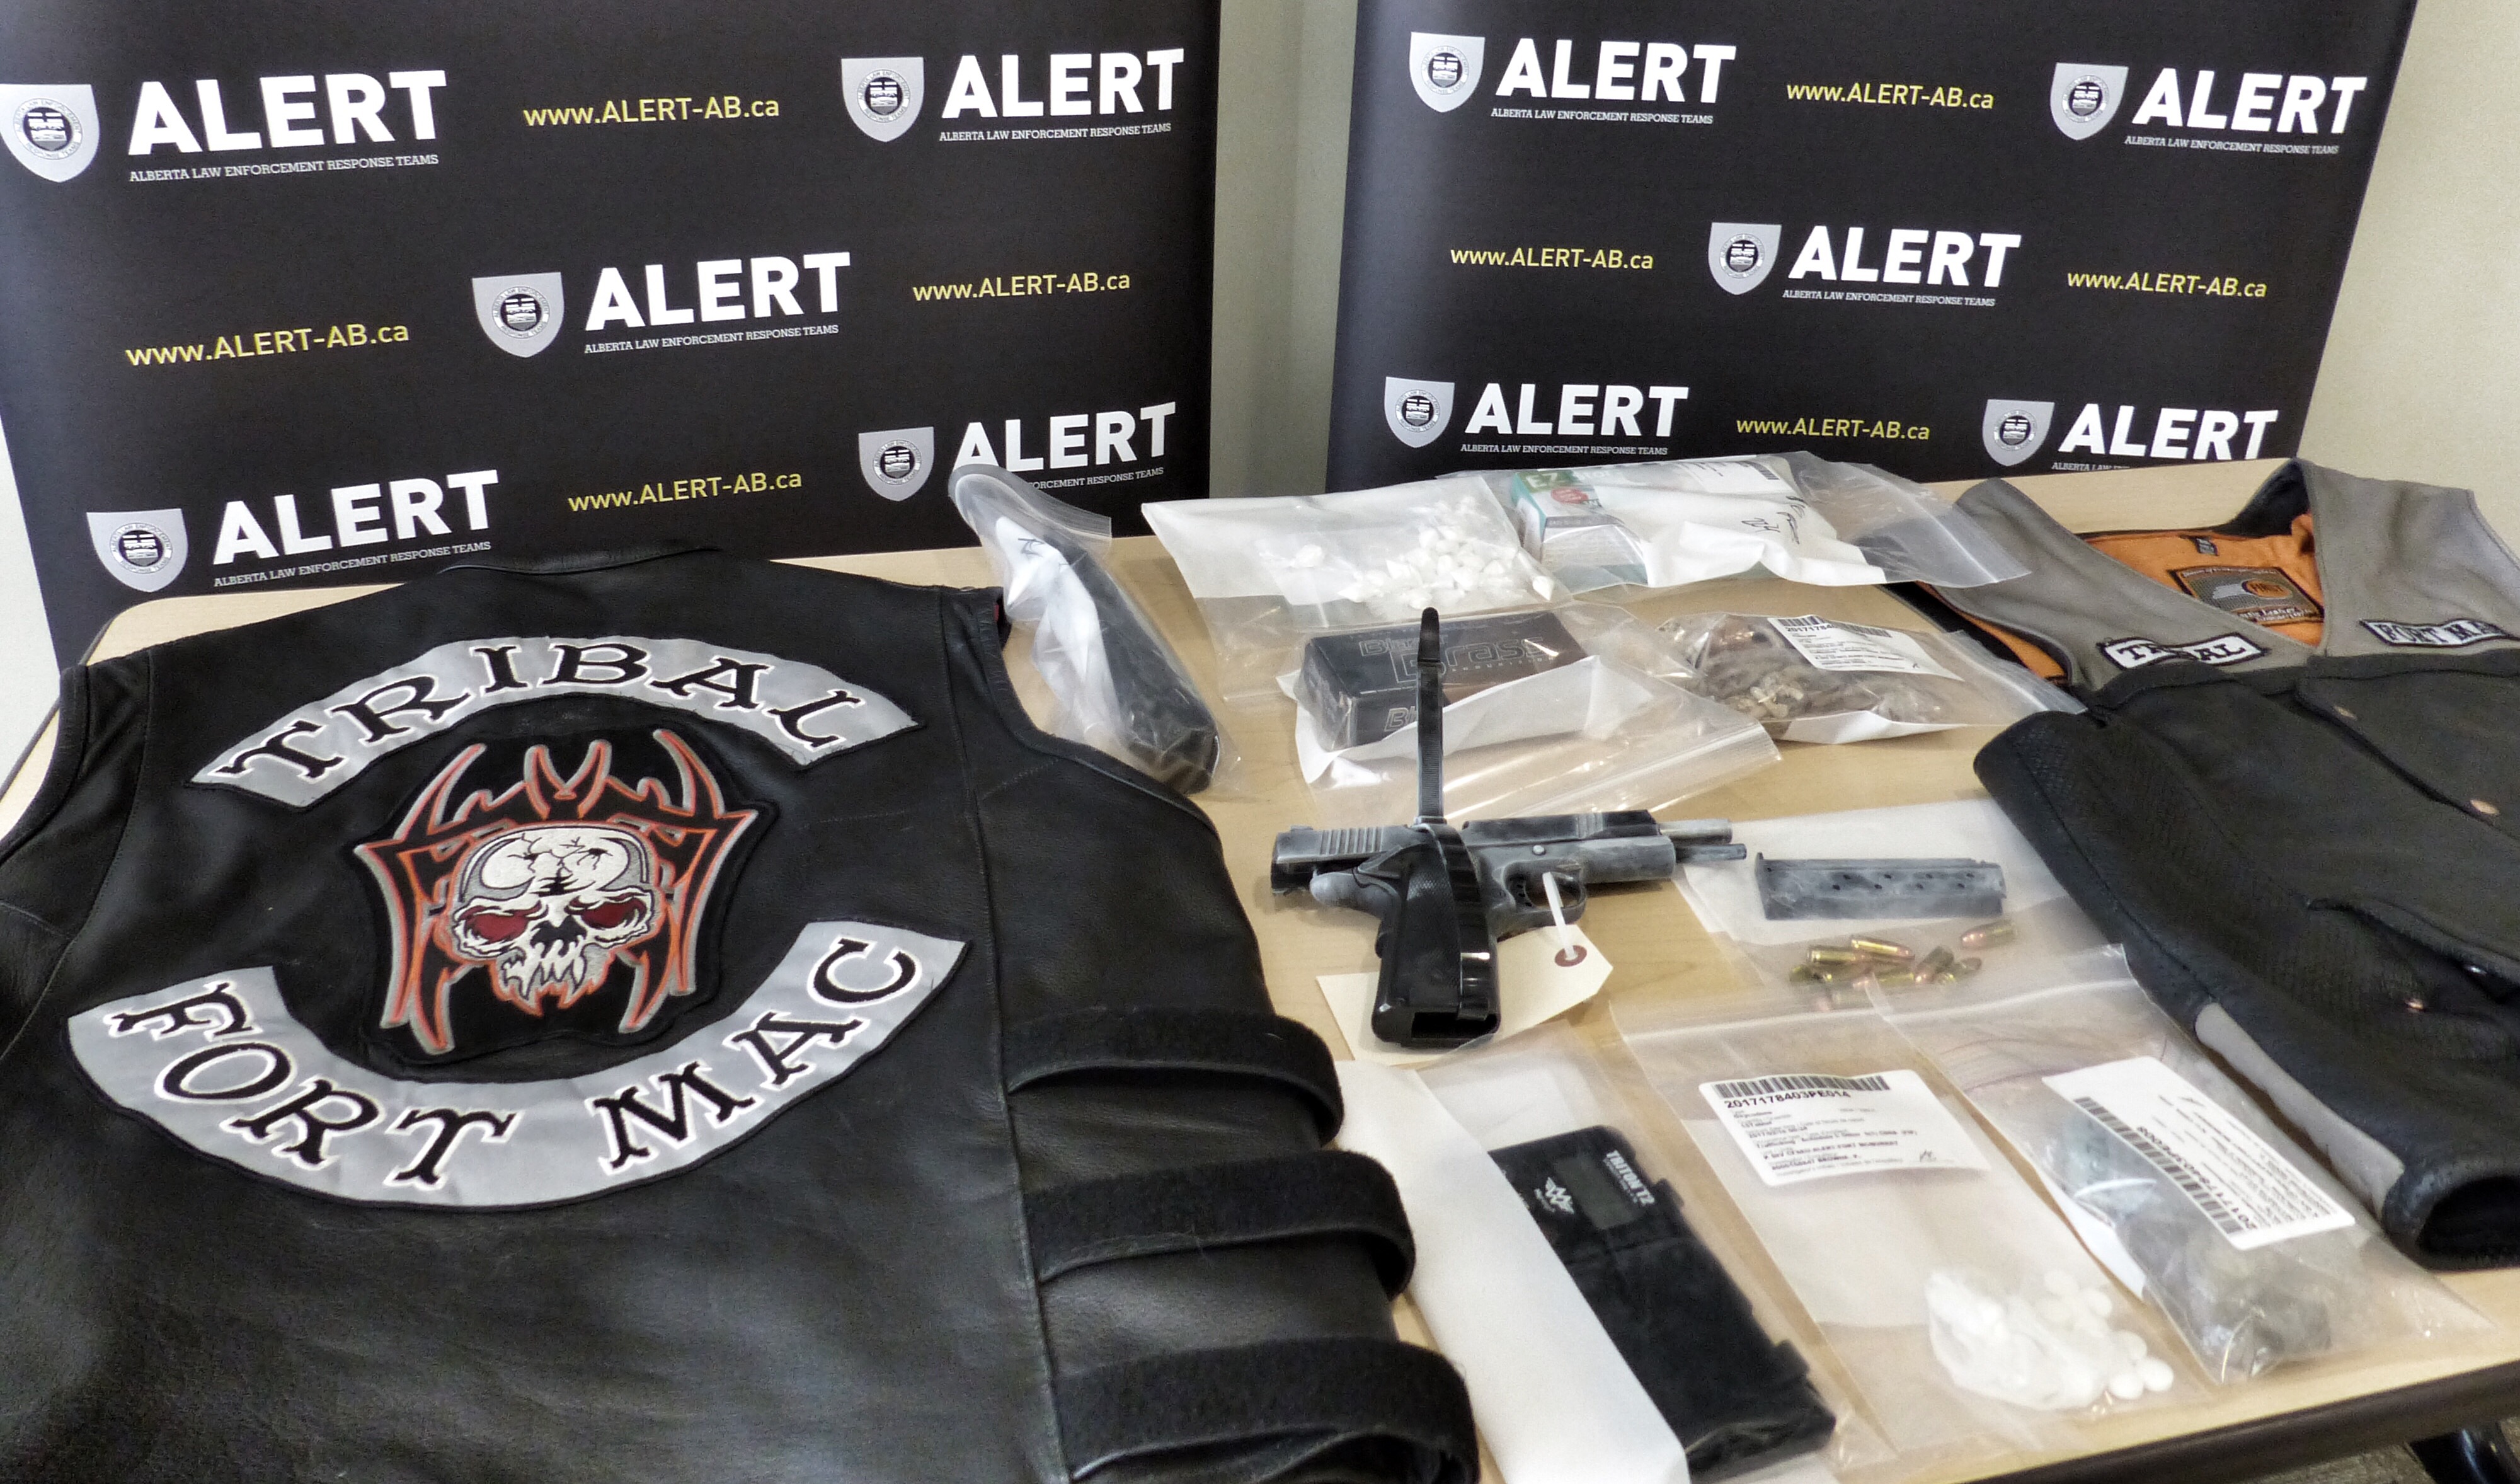 2 arrested after raid on Hells Angels support clubs in Fort